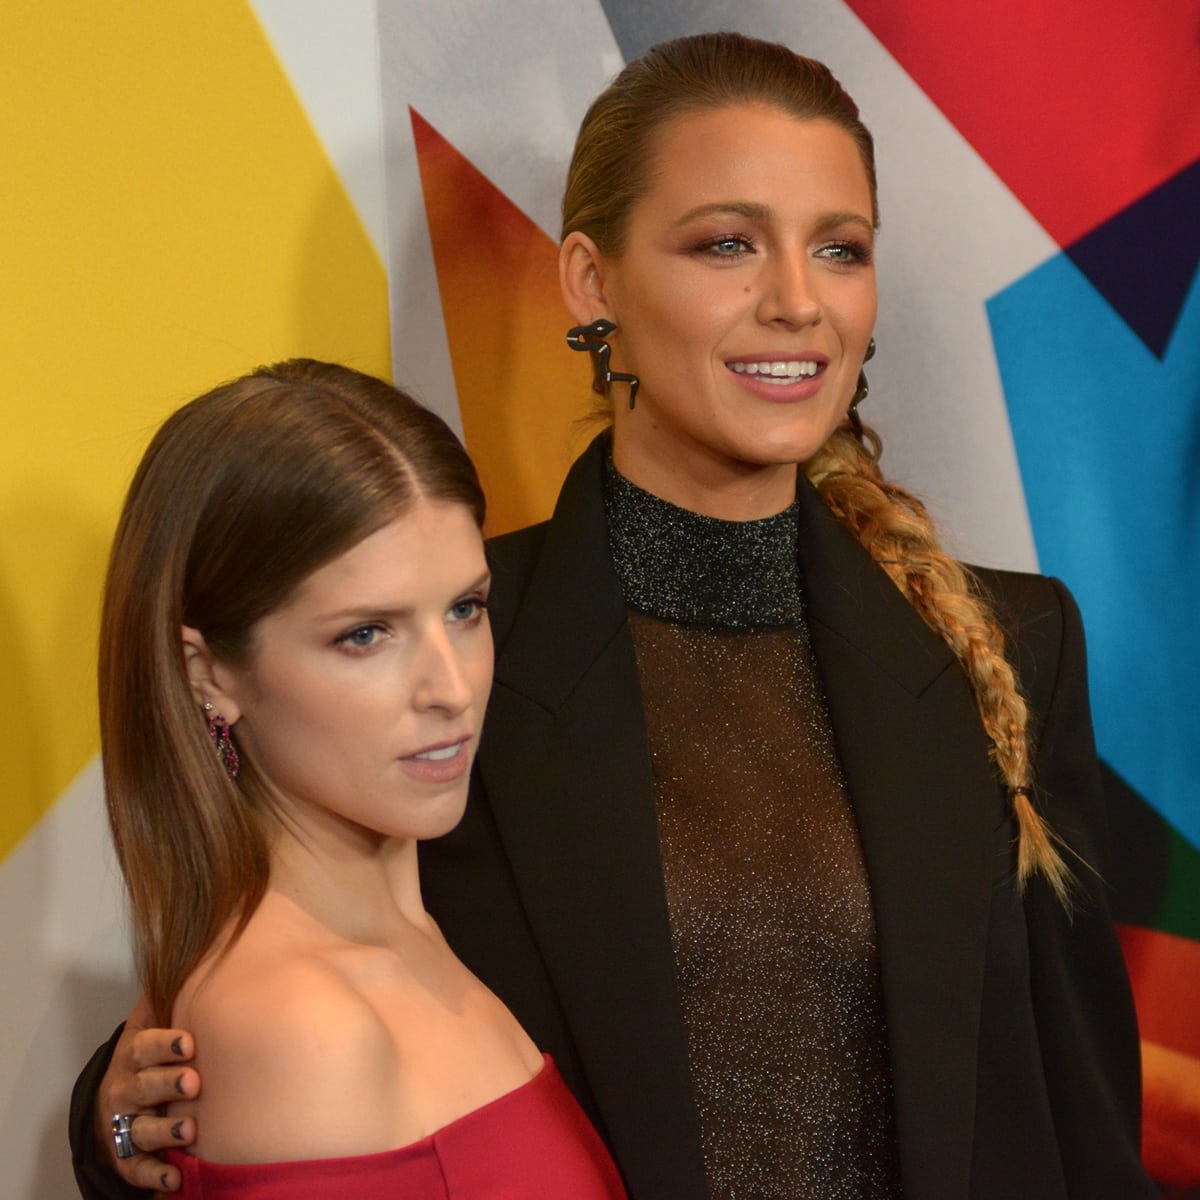 Feuding actresses Anna Kendrick and Blake Lively reportedly can't get along